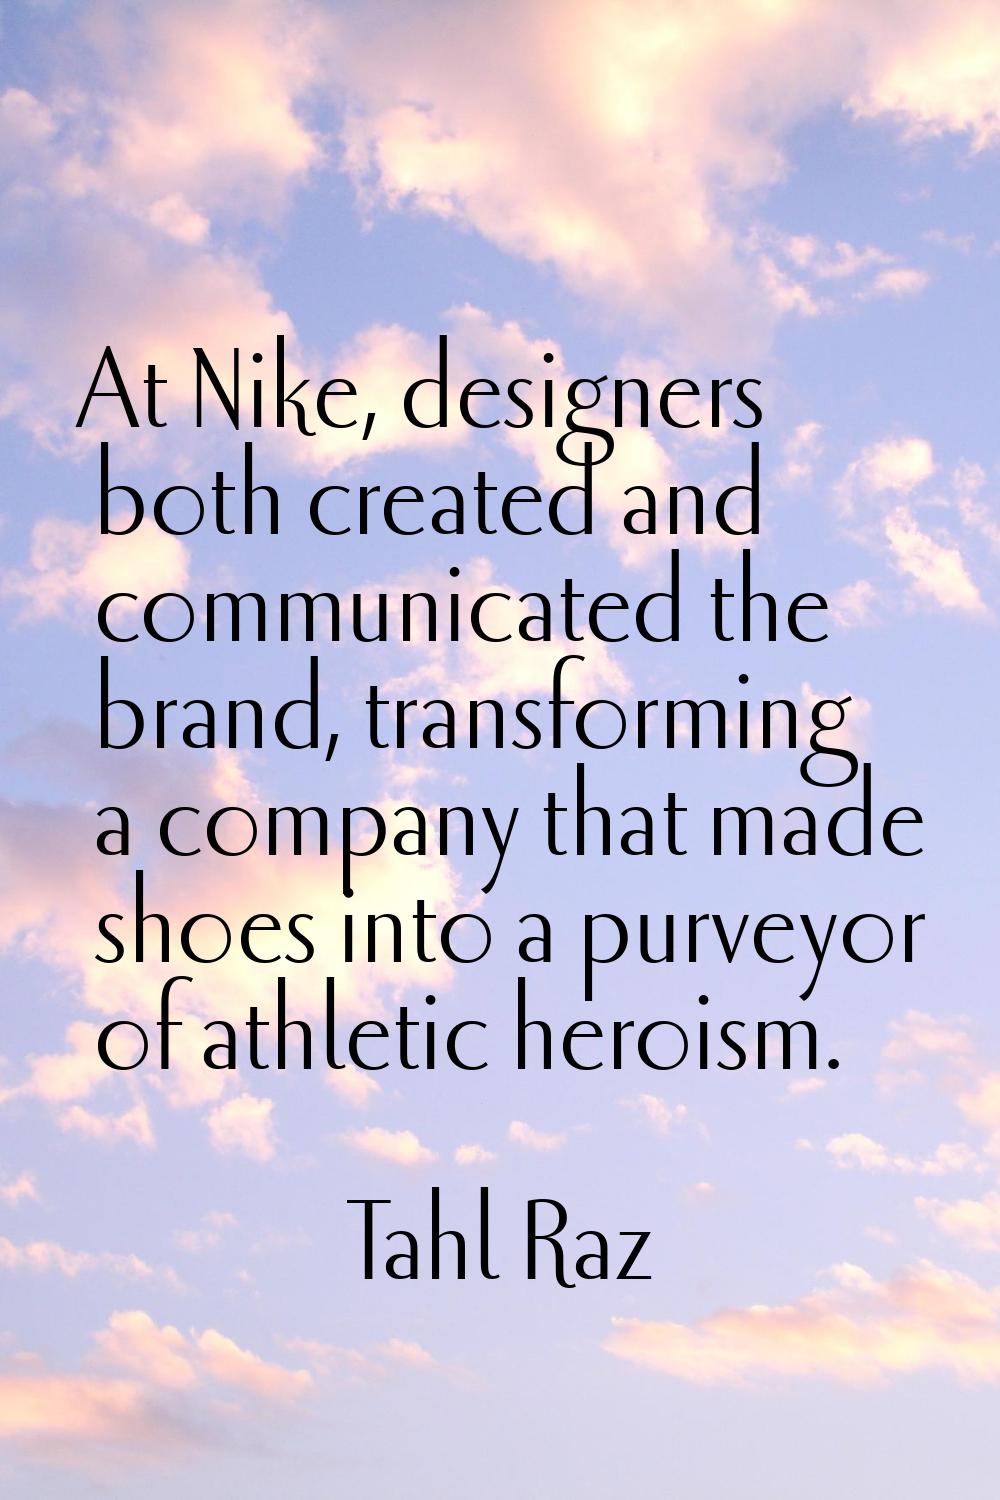 At Nike, designers both created and communicated the brand, transforming a company that made shoes 